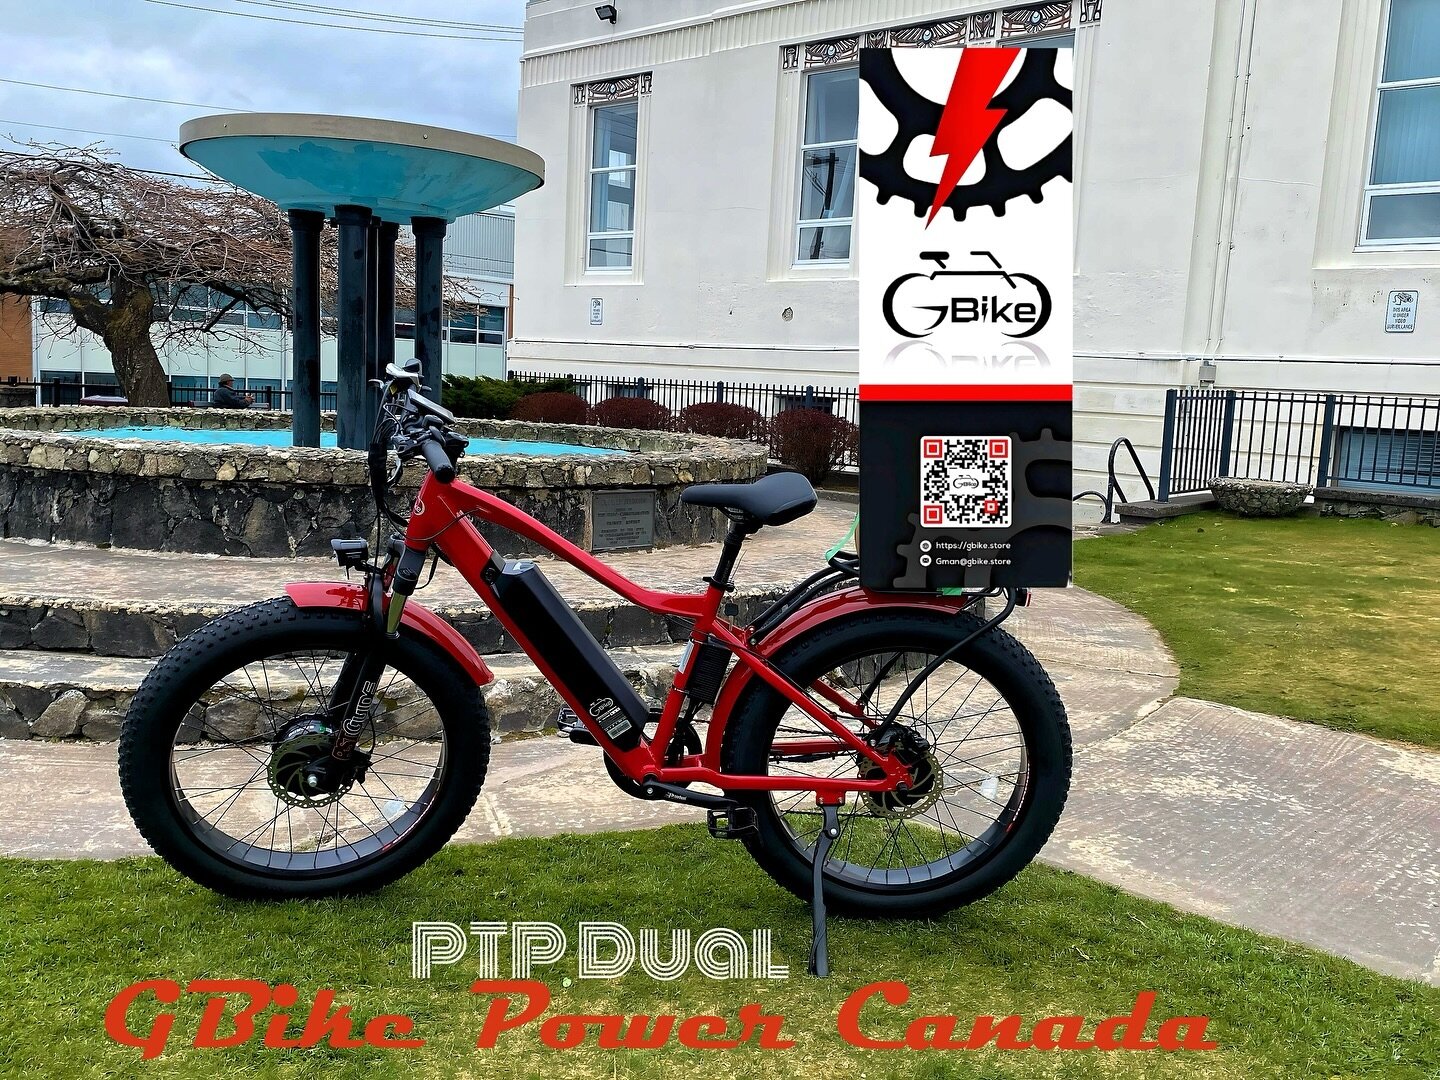 Meet the PTP Dual Motor GBike from GBike Power Canada! 🌟 Zoom through any terrain with a 500 W front motor and a 750 W rear motor. Choose your power: front, rear, or both for maximum efficiency. Enjoy long rides with a 21-hour Samsung battery, smoot